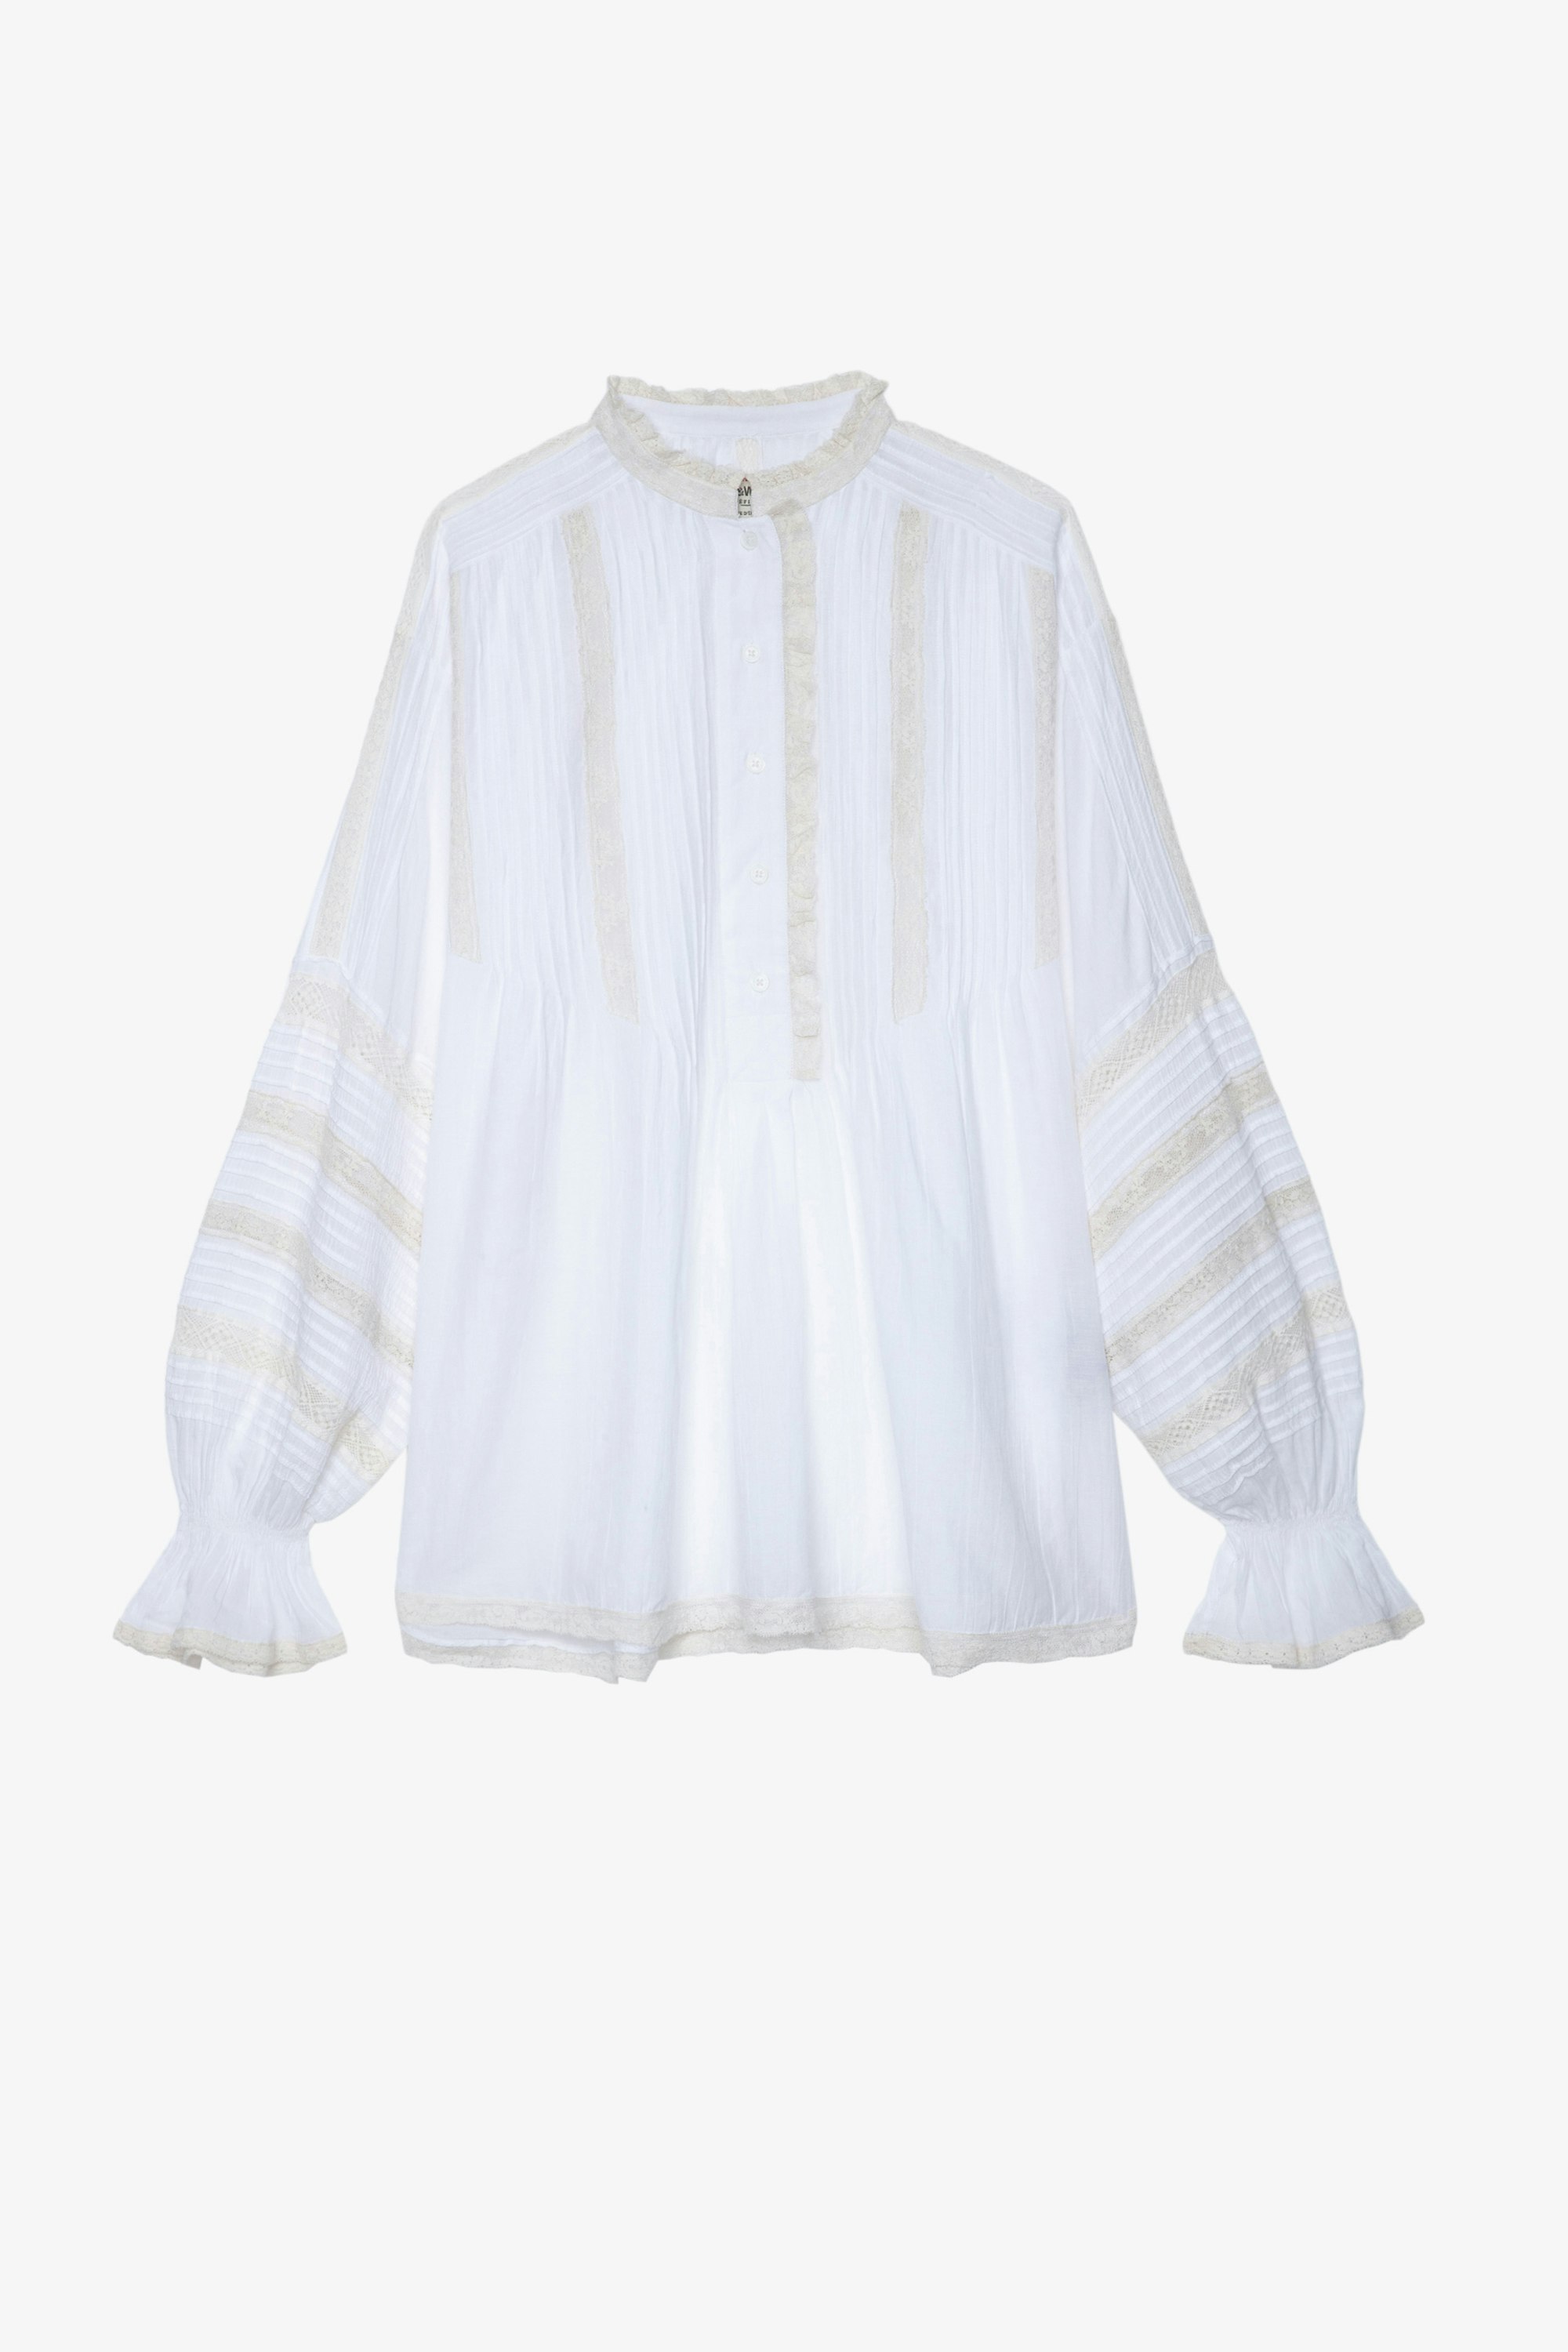 Tritelia Blouse Women's white blouse with lace strips and oversize sleeves